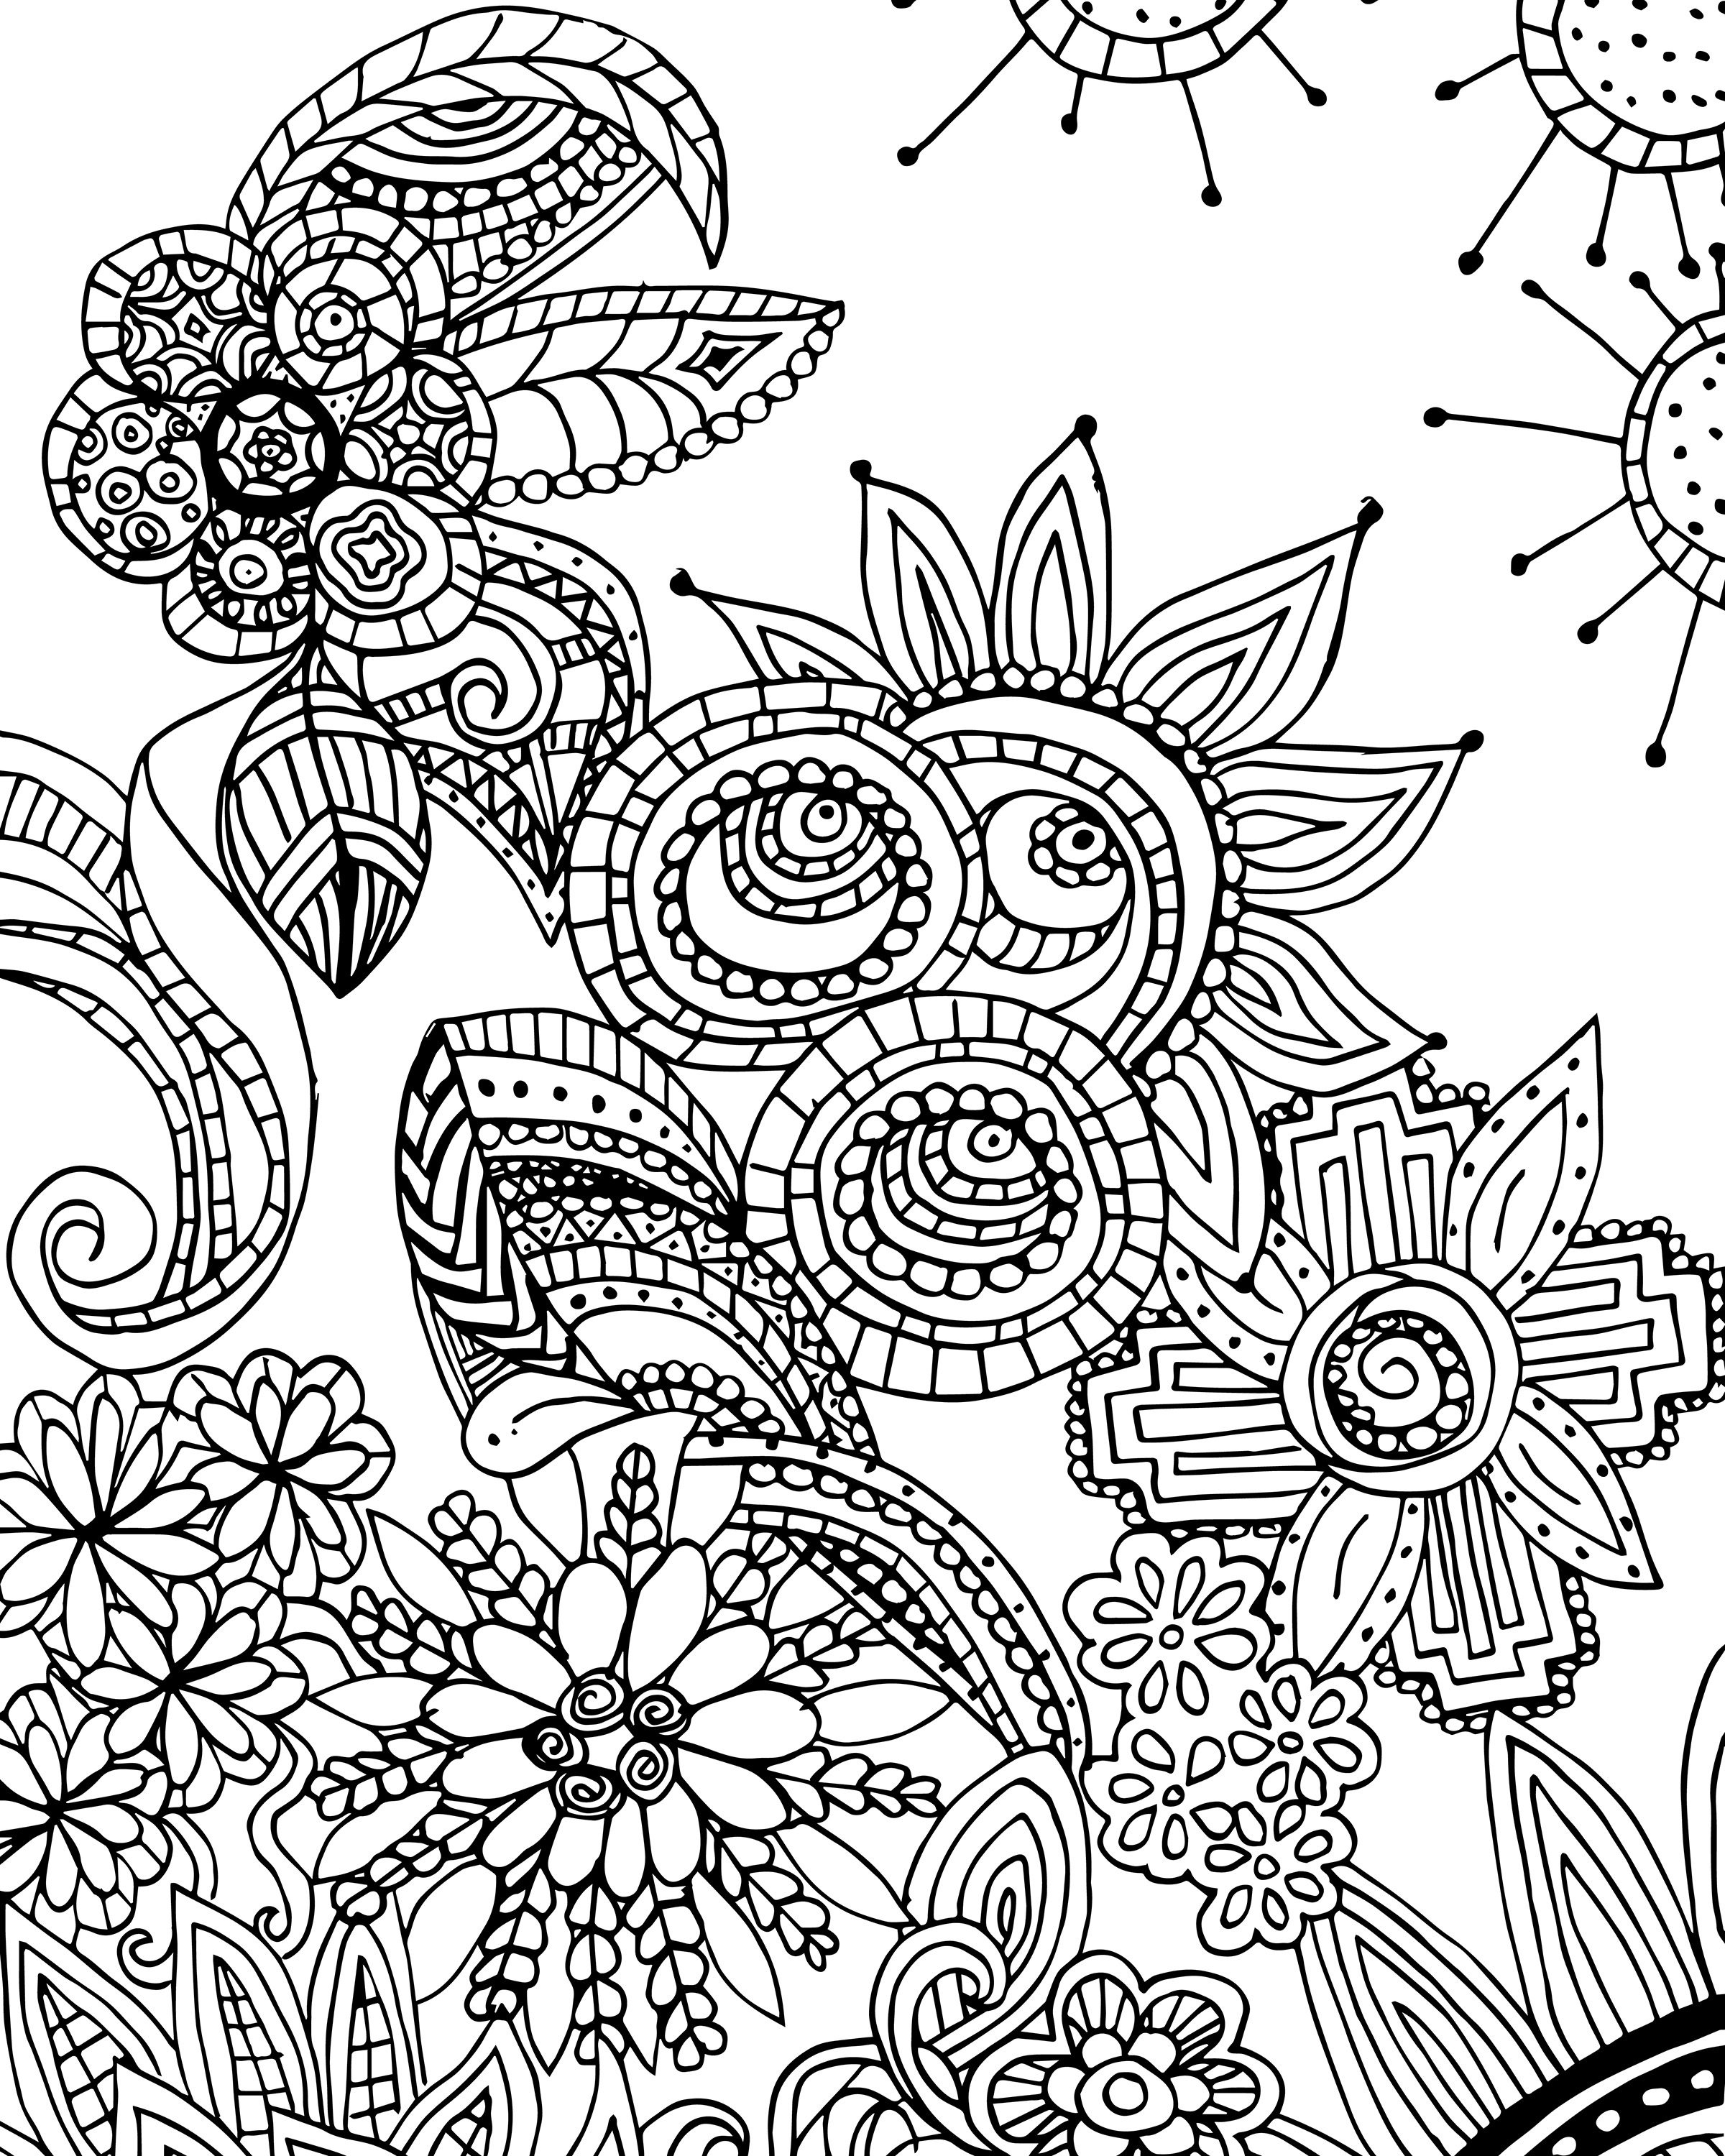 Free Coloring Page For Adults - Flower Zen Doodle Designs | Free - Free Printable Zen Coloring Pages